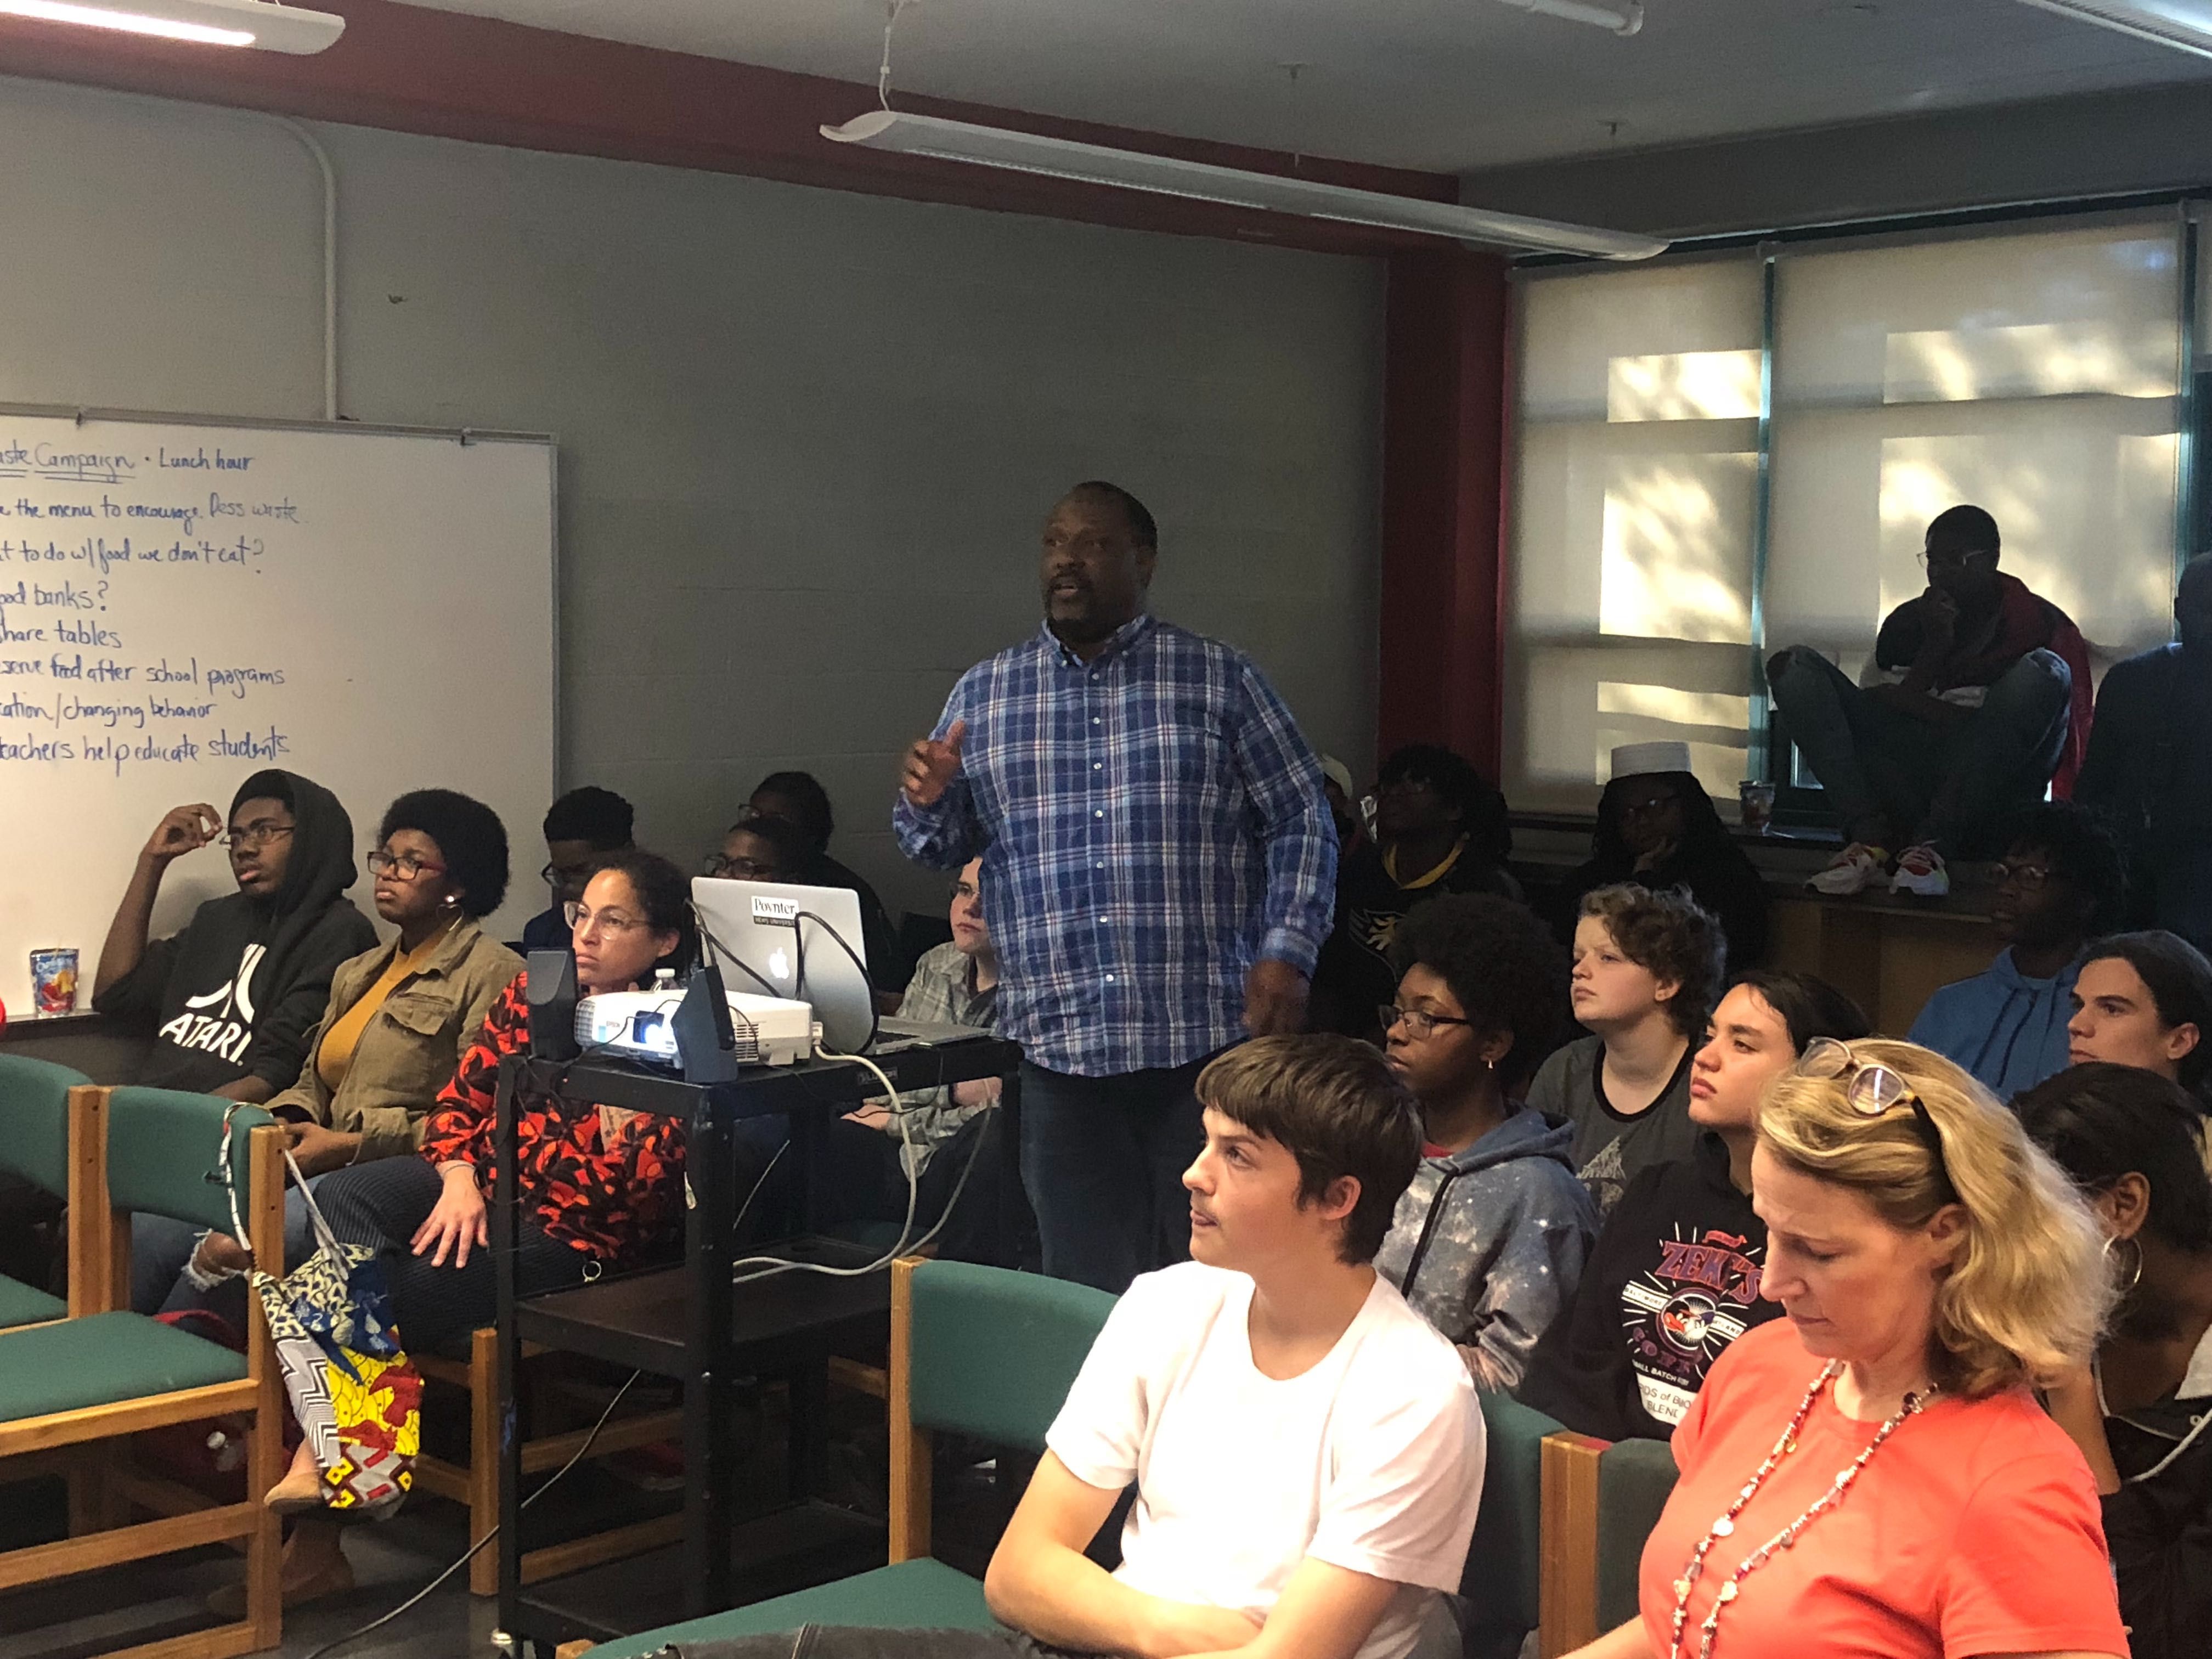 Journalist Kevin Richardson from the Baltimore Sun presents to students at Bard Early College High School in Baltimore. Image by Hannah Berk. United States, 2019.